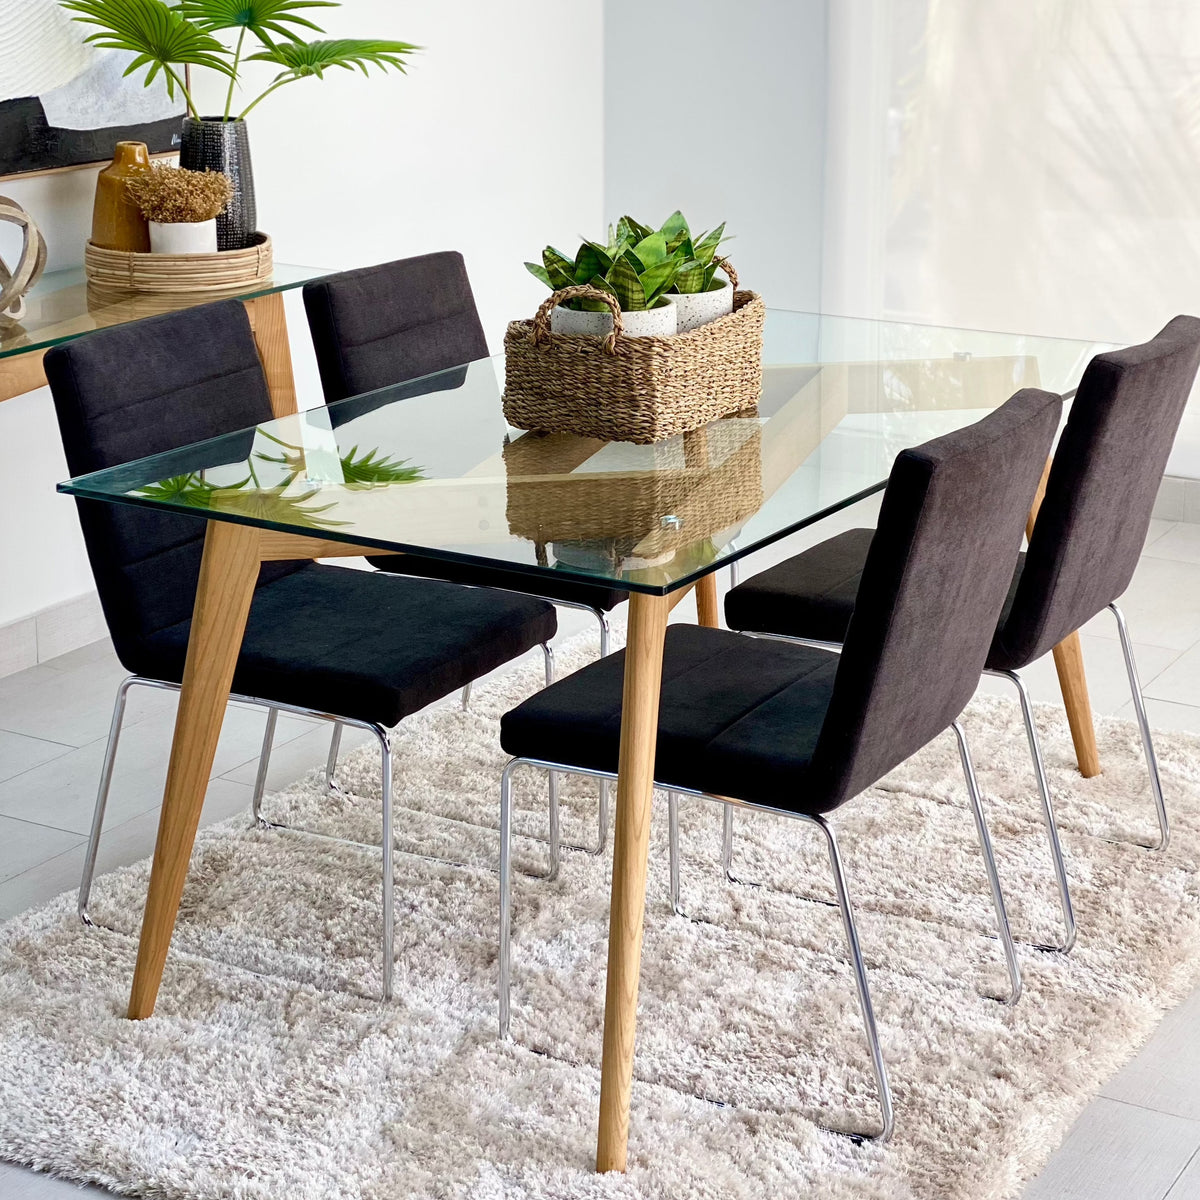 Rectangle Ash Wood Dining Table Legs Set